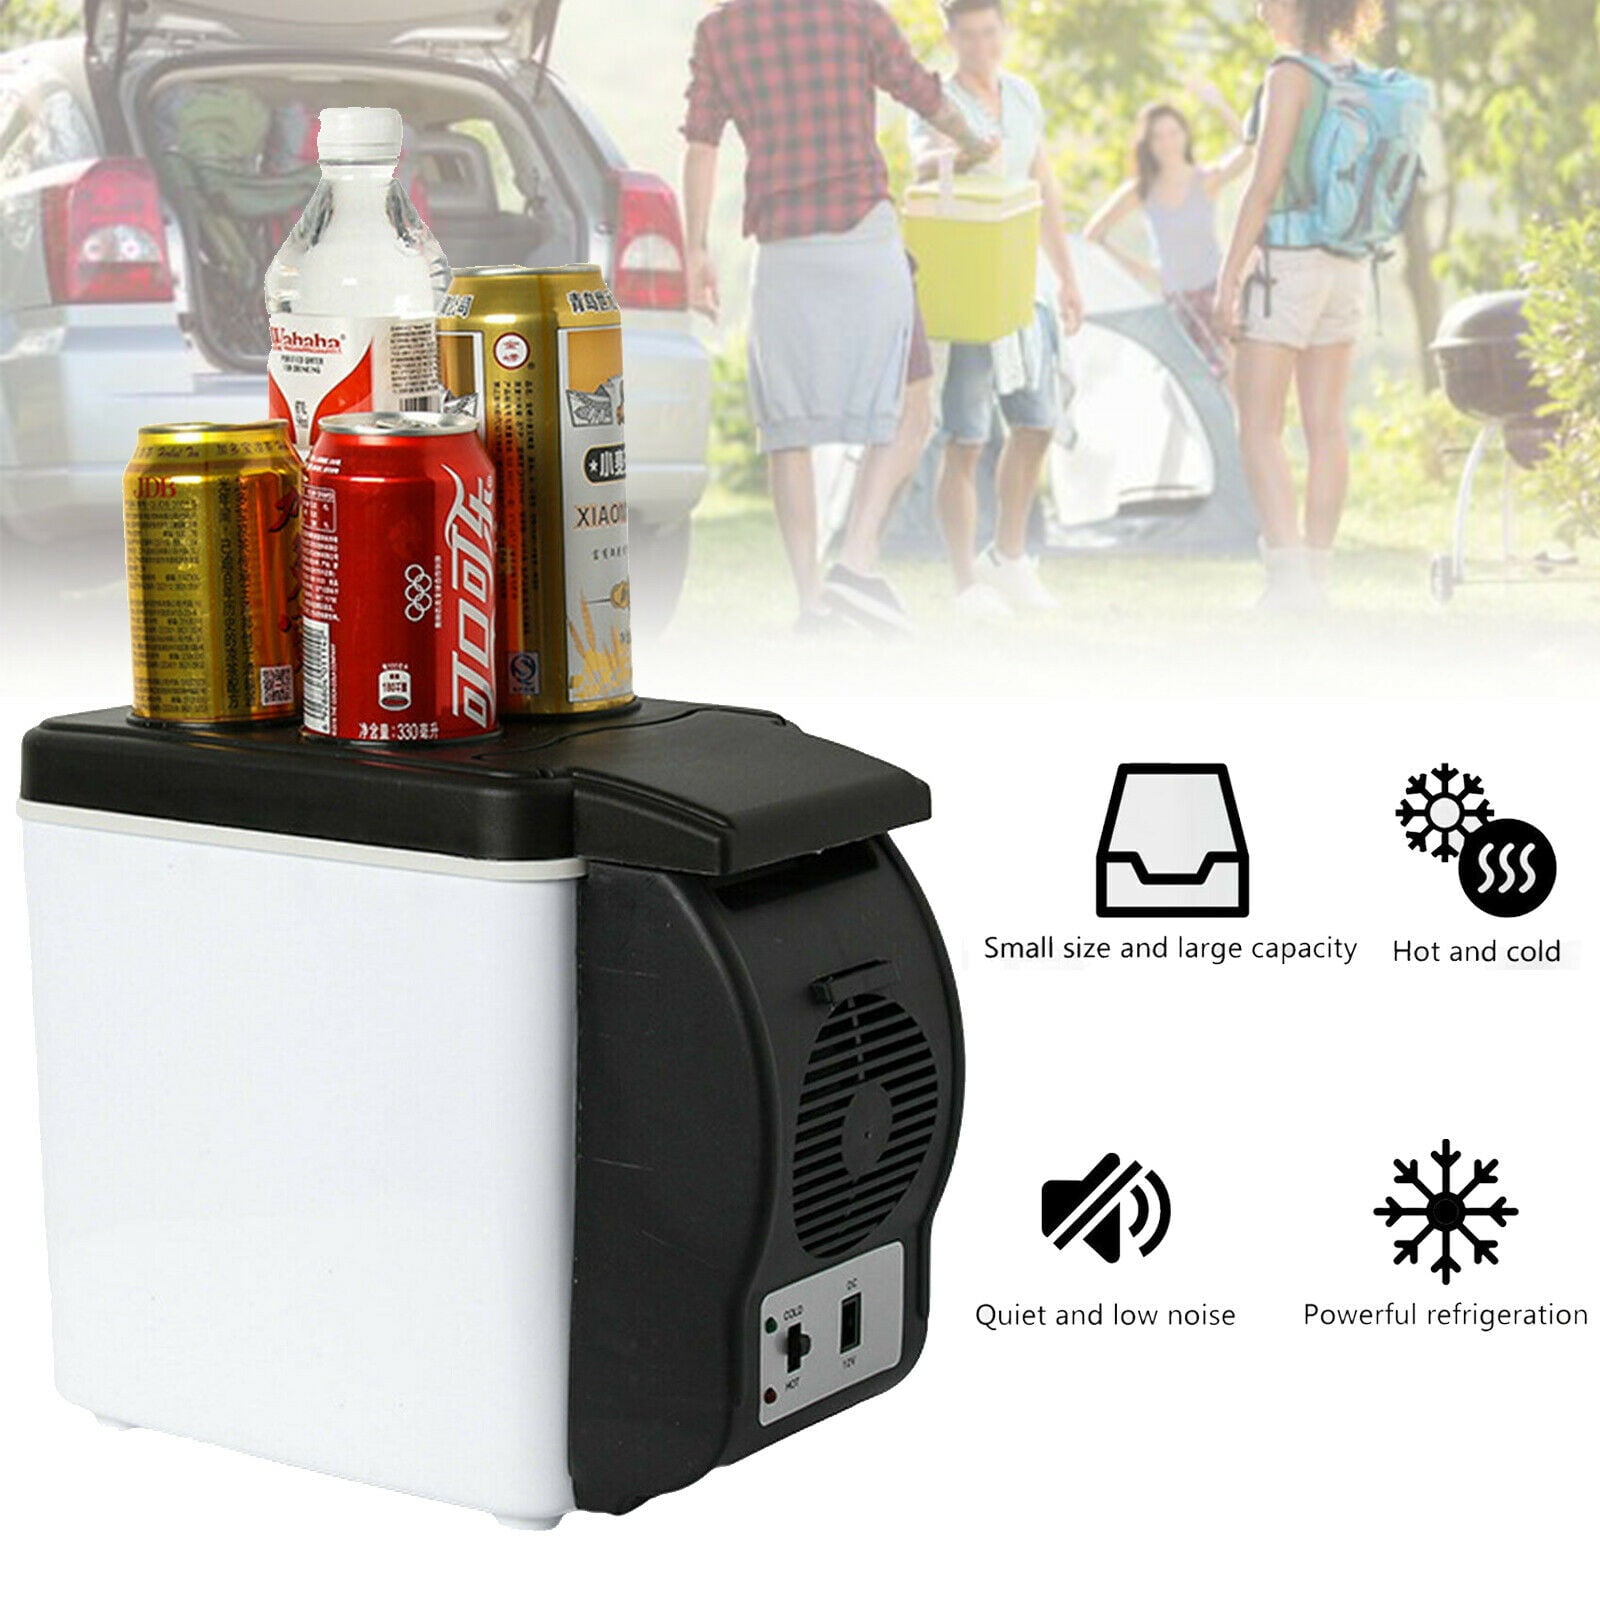 Anqidi 6L Portable Car Refrigerator, Vehicle Warmer Cooler Electric Fridge Freezer for Driving Camping Travel Fishing Home 12V 38W